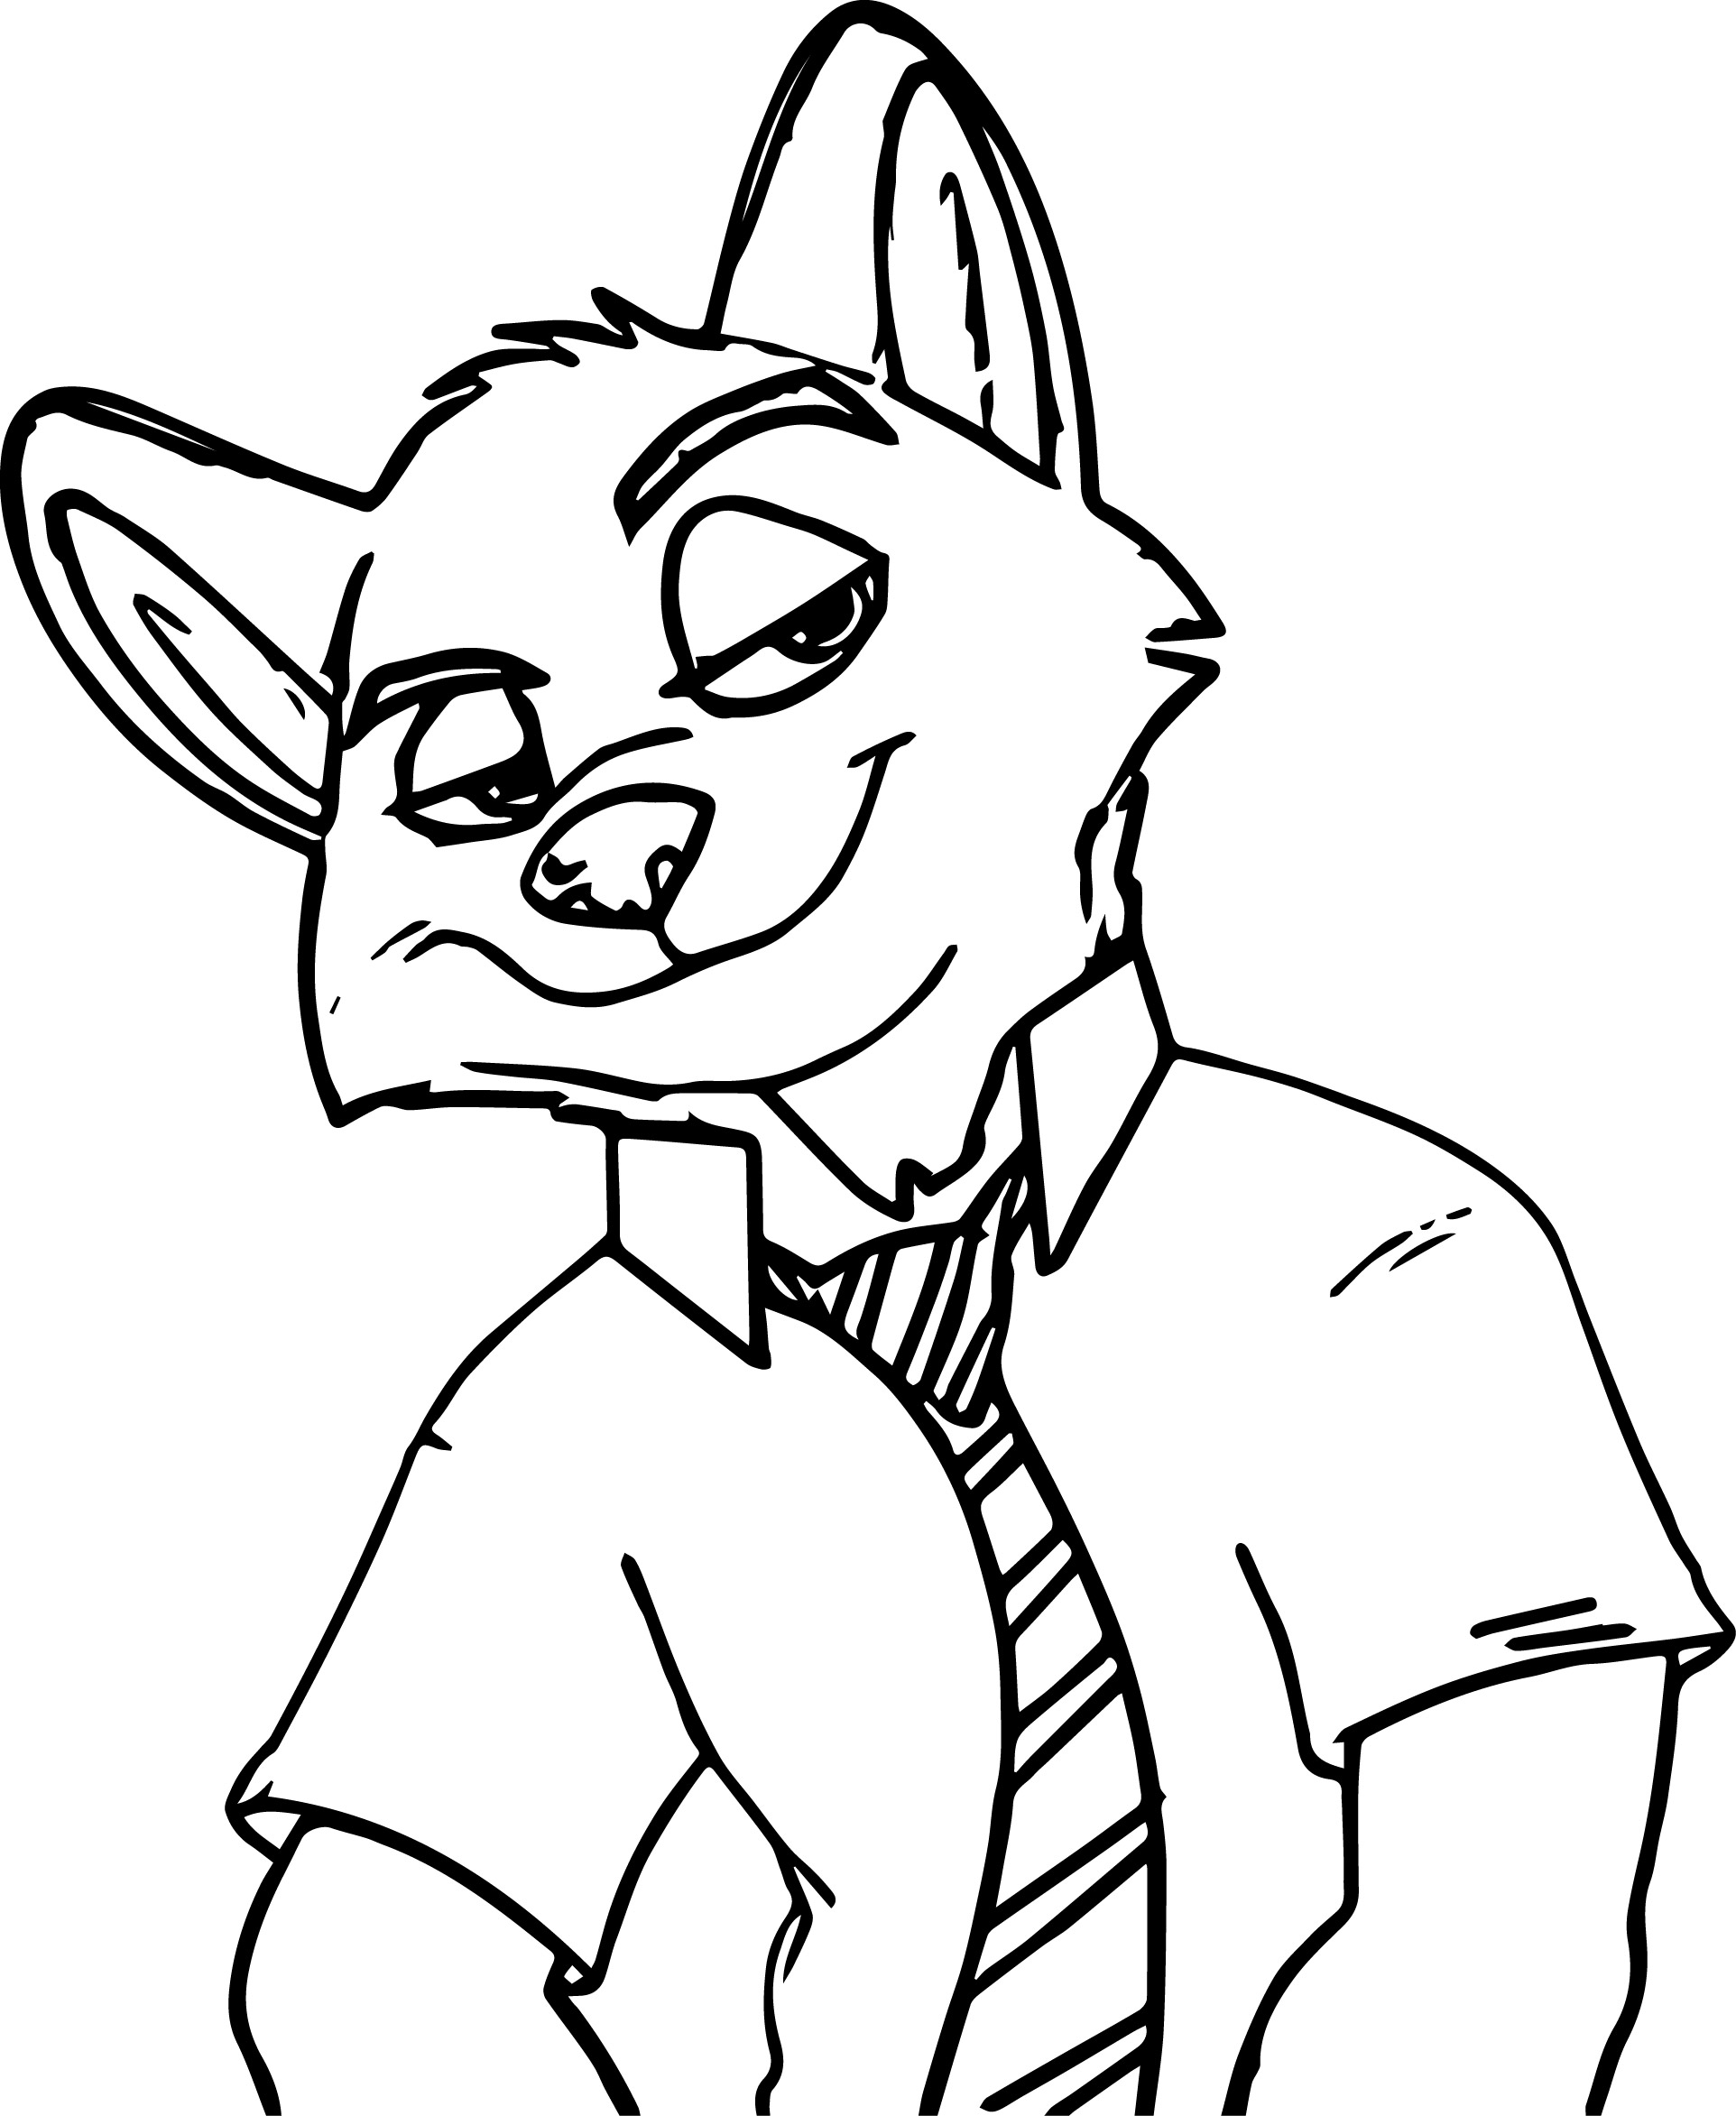 nick-wilde-smiling-coloring-page-free-printable-coloring-pages-for-kids